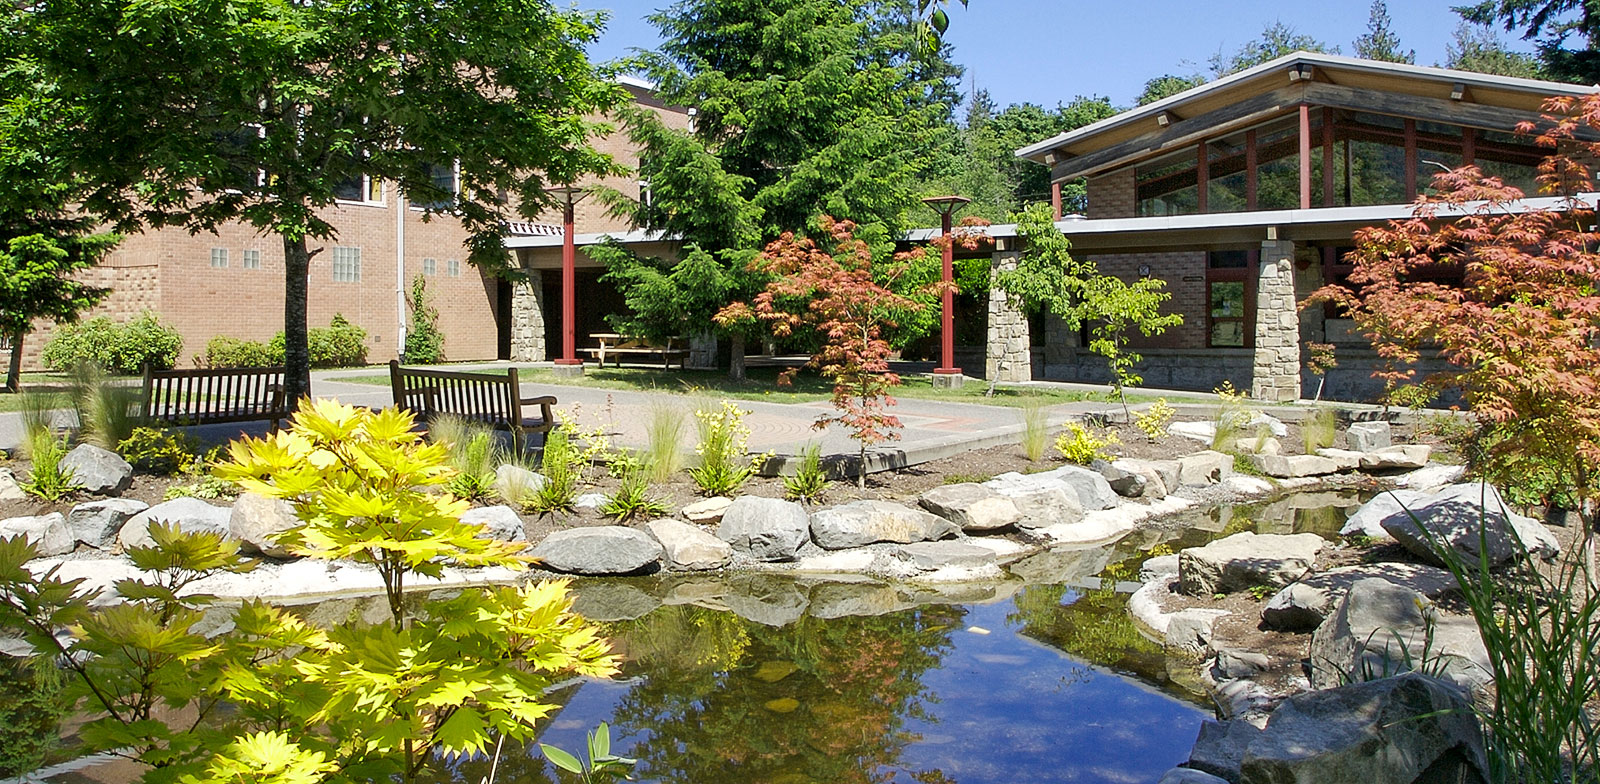 A campus courtyard at Gulf Islands Secondary School